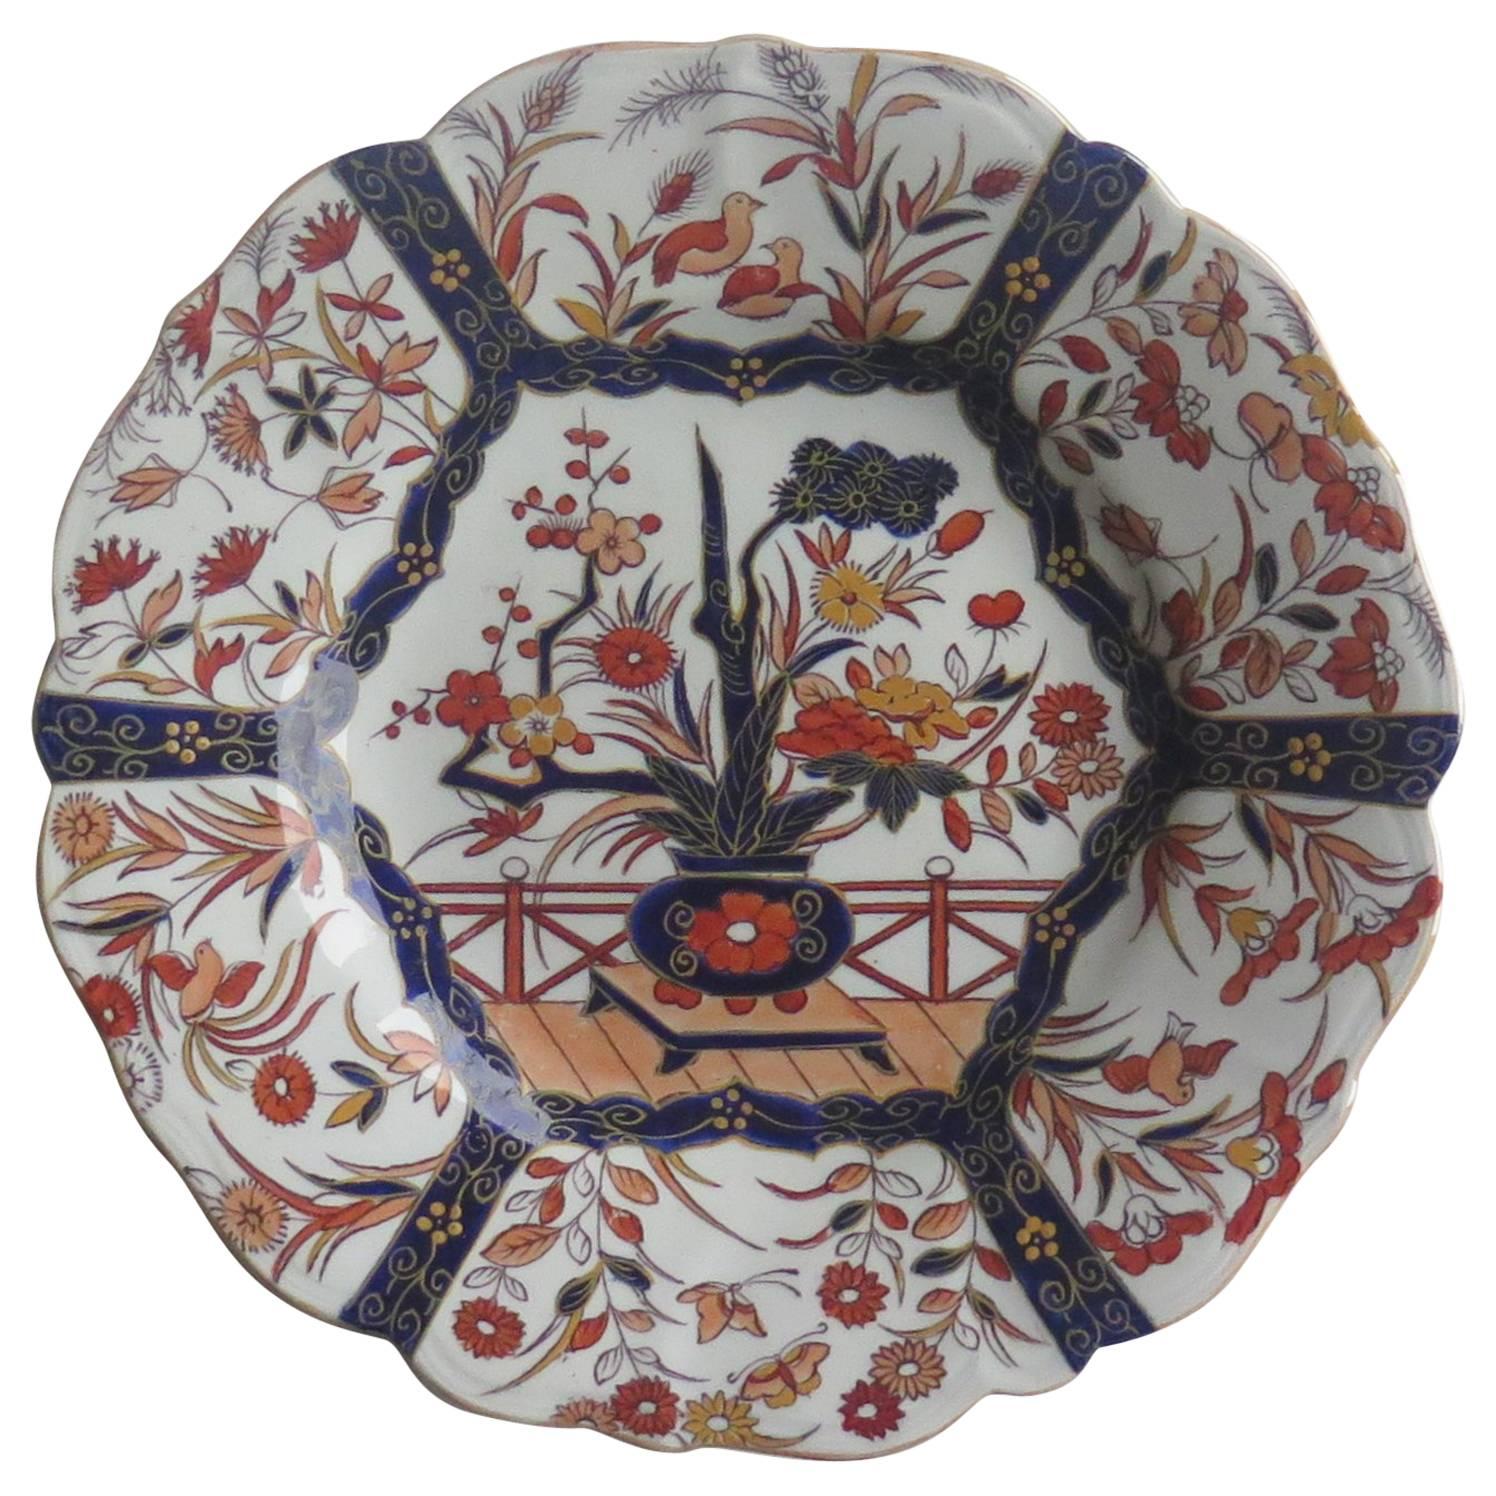 Mason's Ironstone Desert Plate Fence and Bowl Pattern Hand-Painted, circa 1825